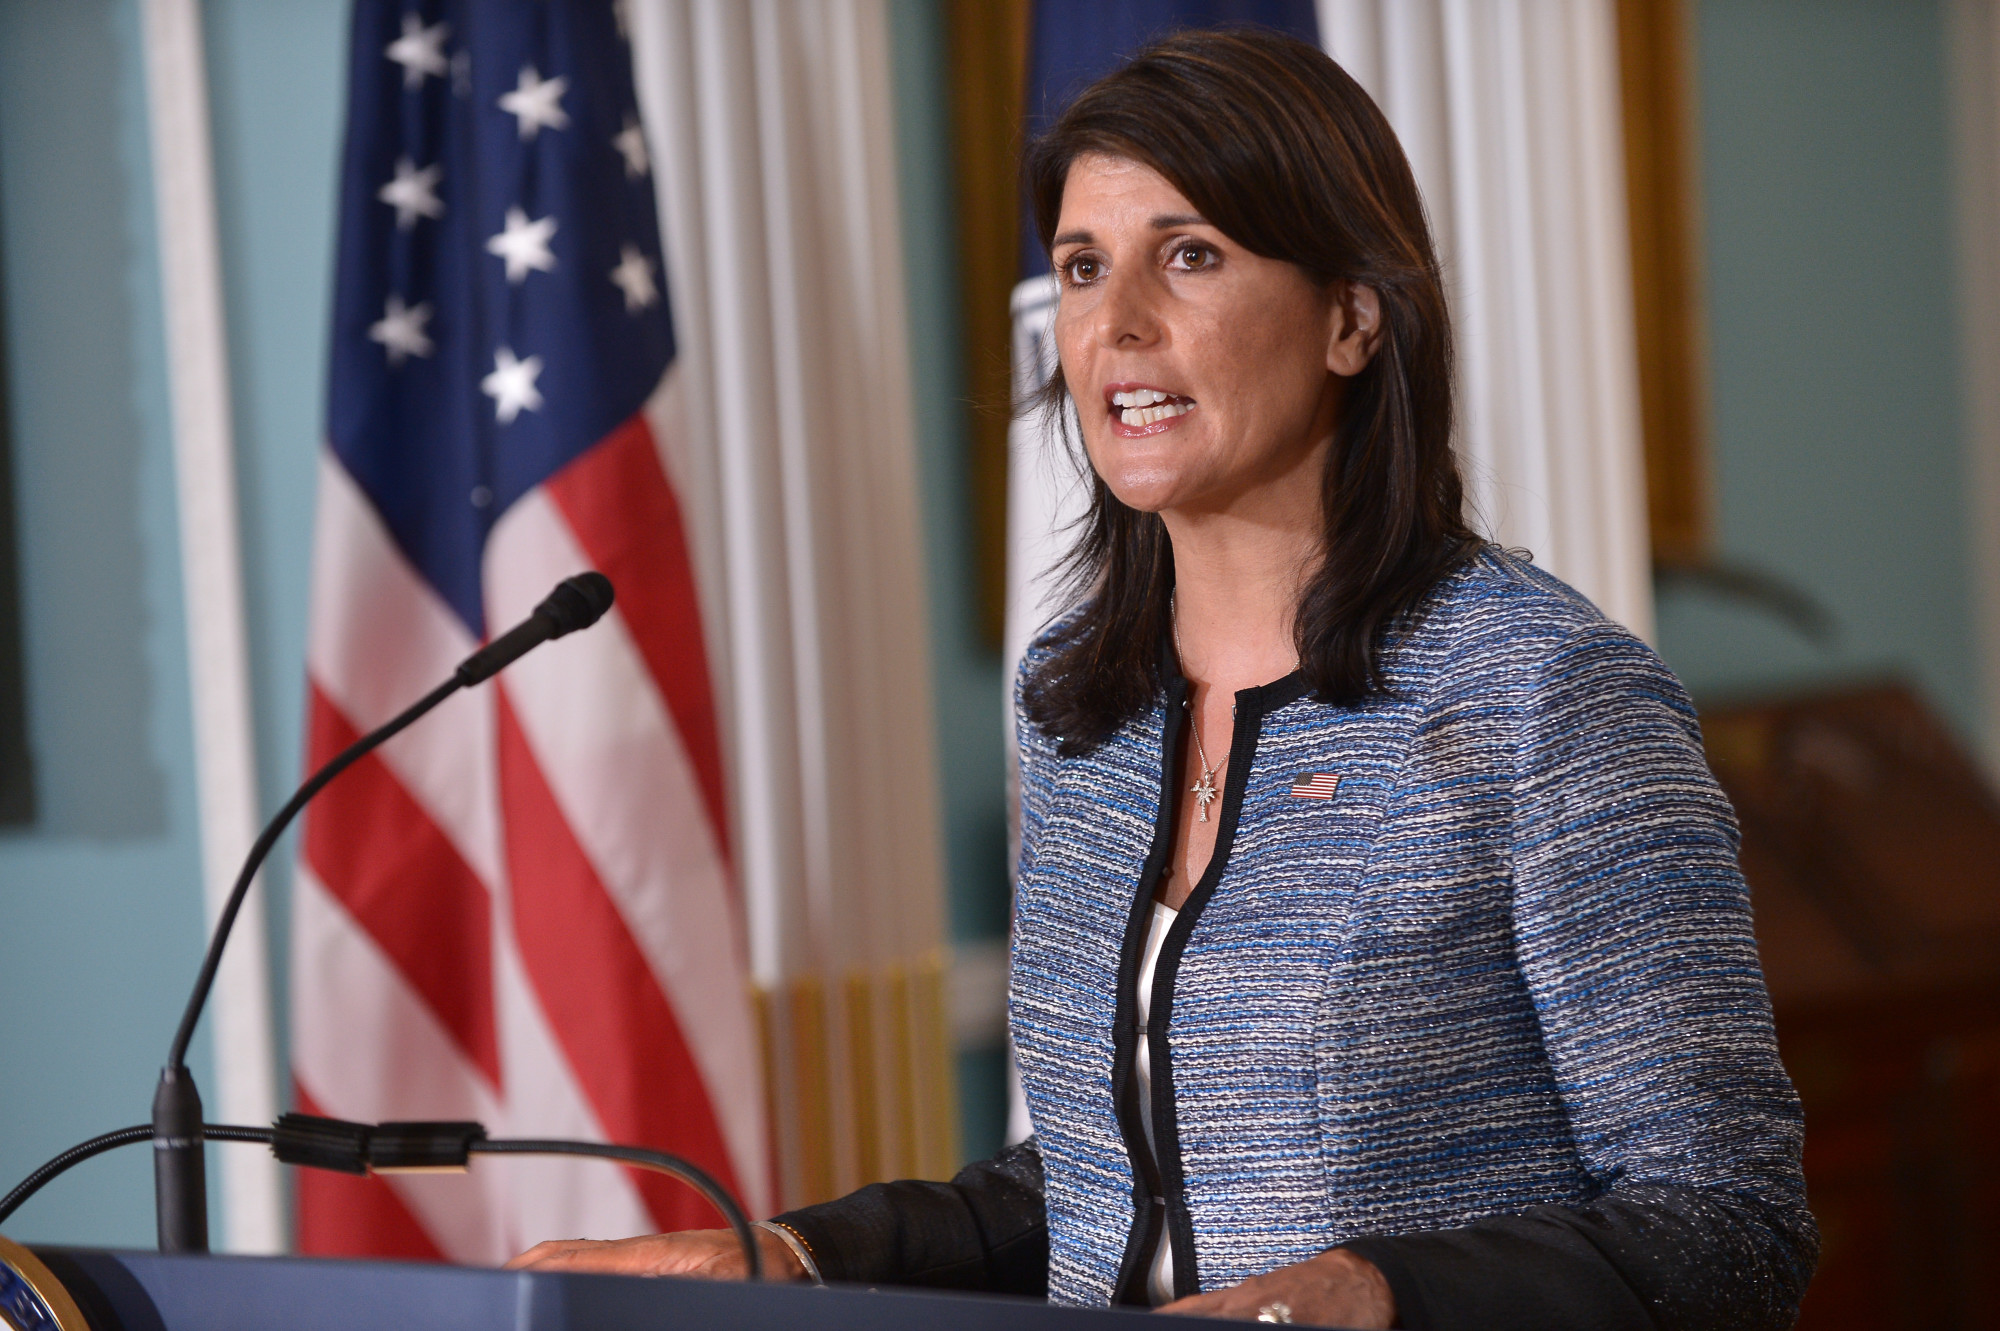 Nikki Haley claims Texas has the right to secede from US: ‘That’s their decision to make’